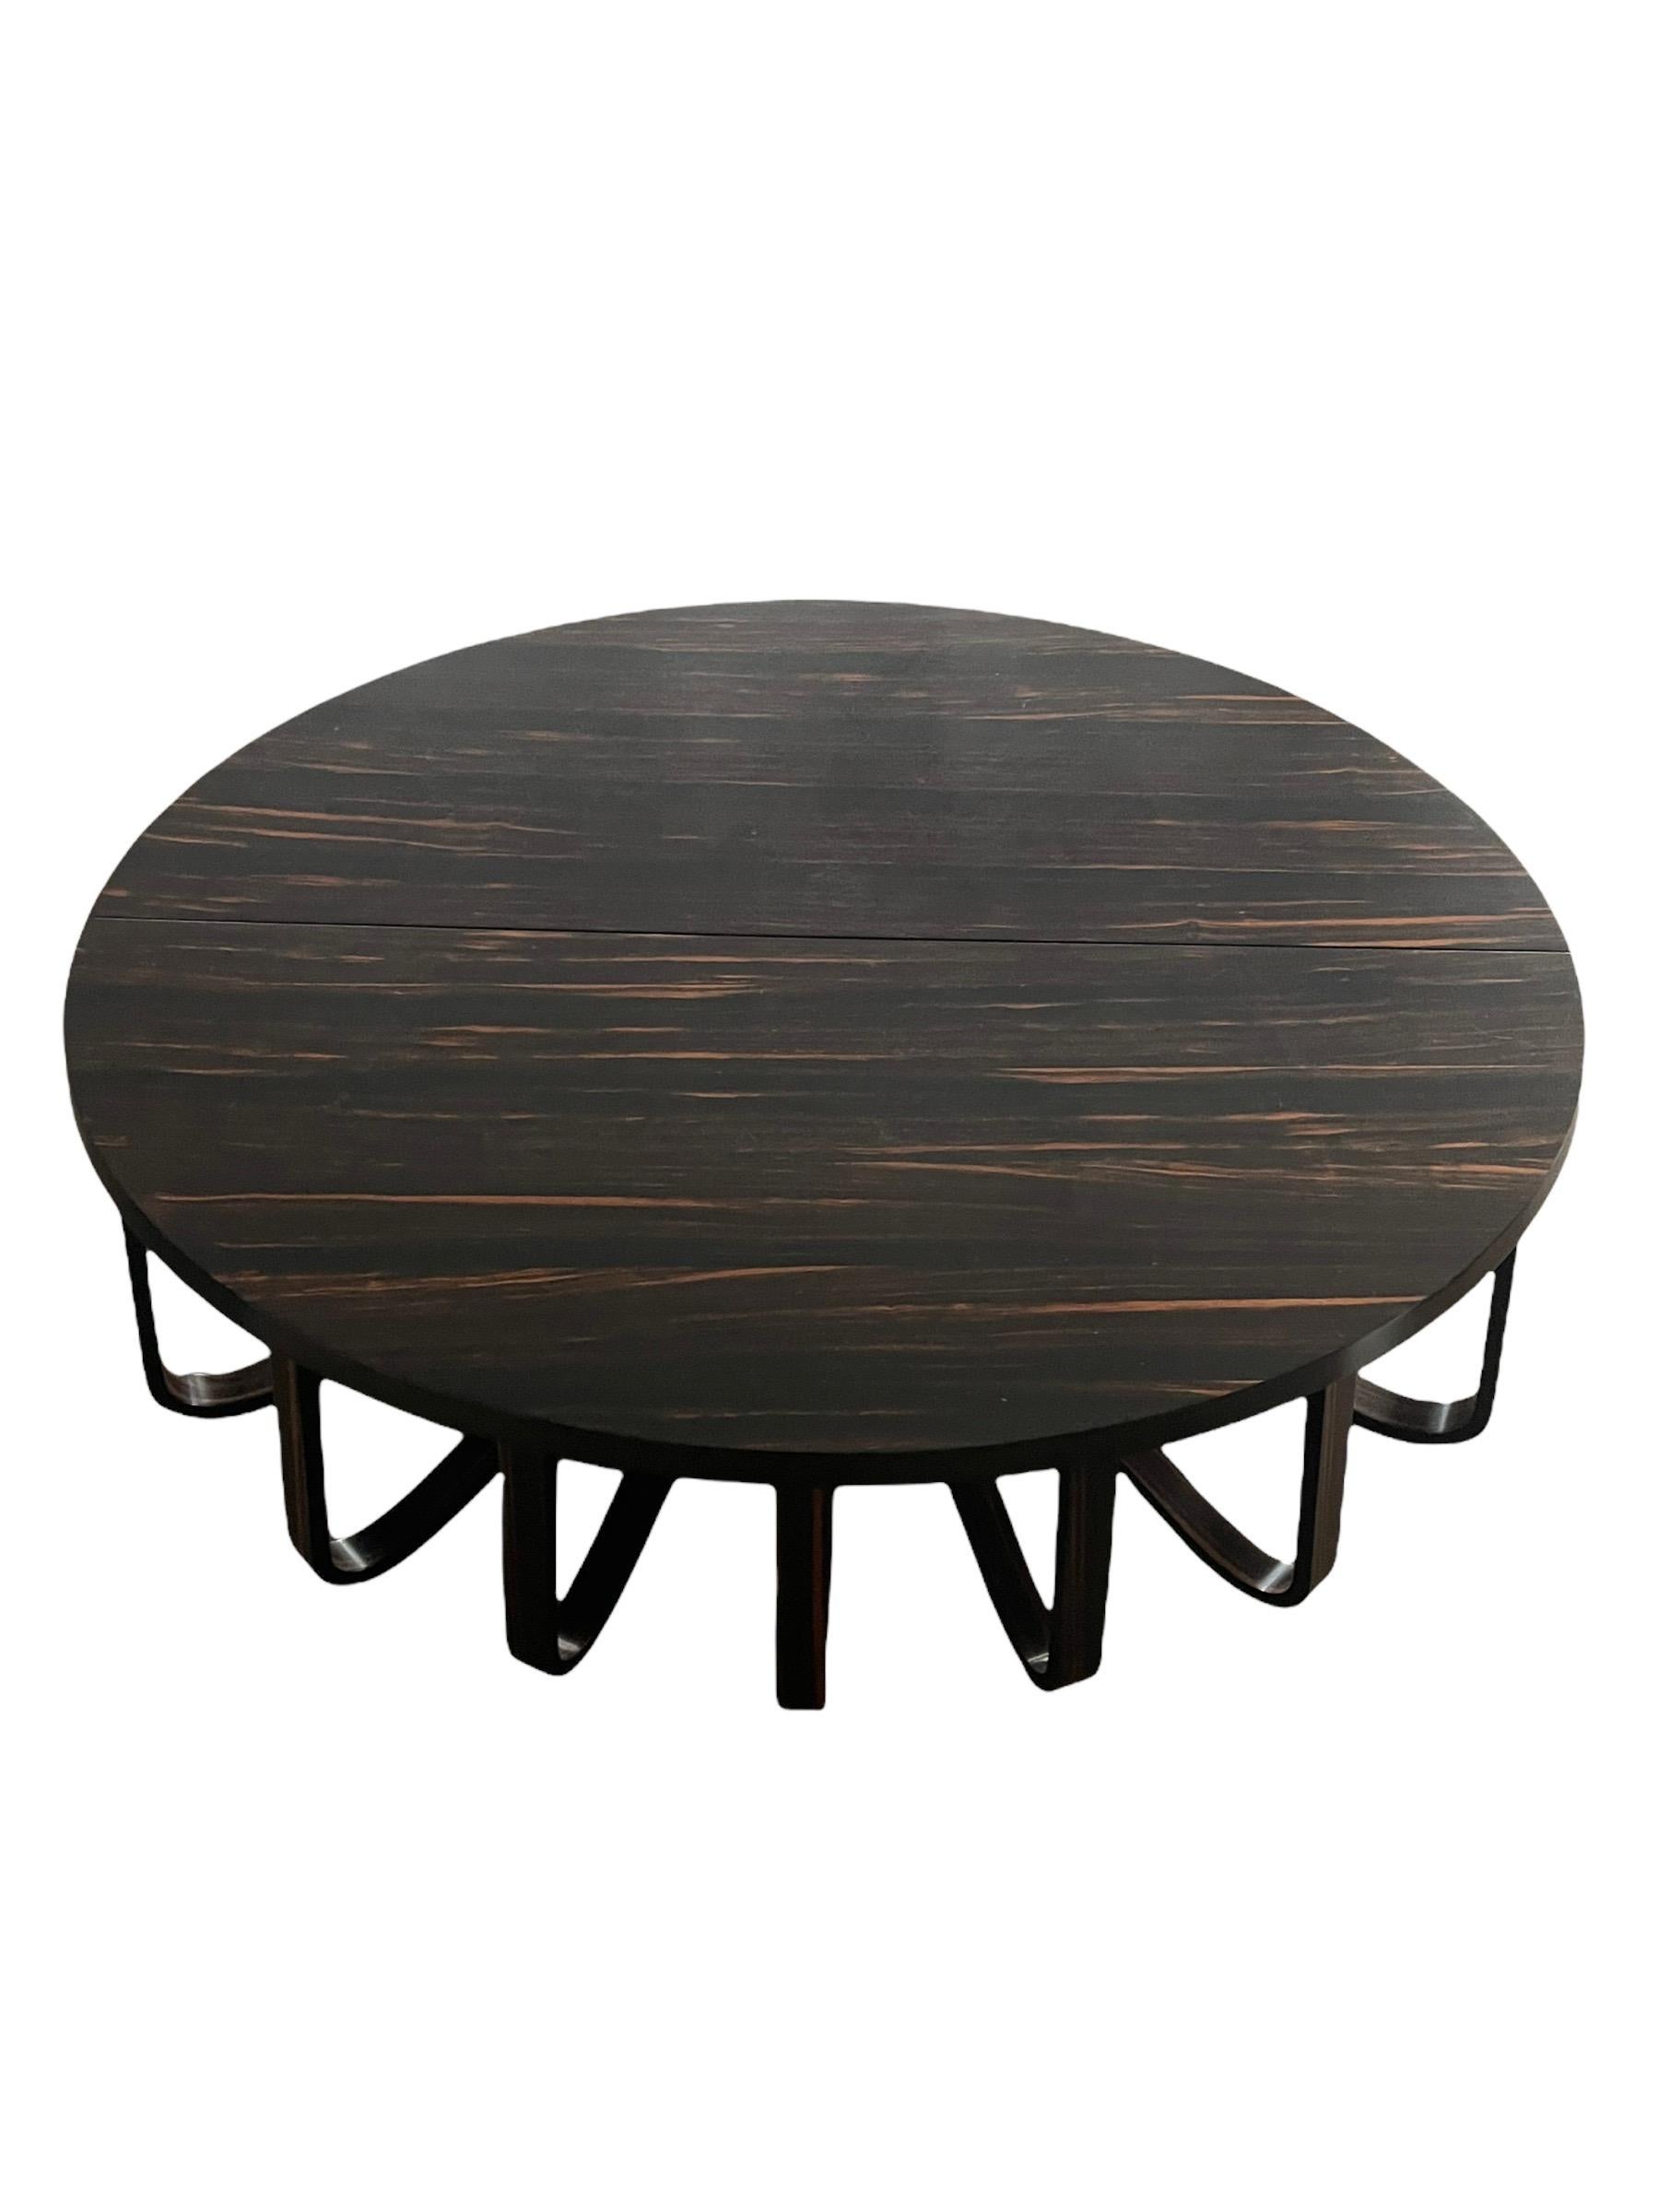 Very unique and rare contemporary pair of half oval shaped coffee tables that go together as one. Macassar top and walnut base, designed by Ralph Rucci for Holly hunt. It was a special edition in which only a few were made. 

Measures: Together: